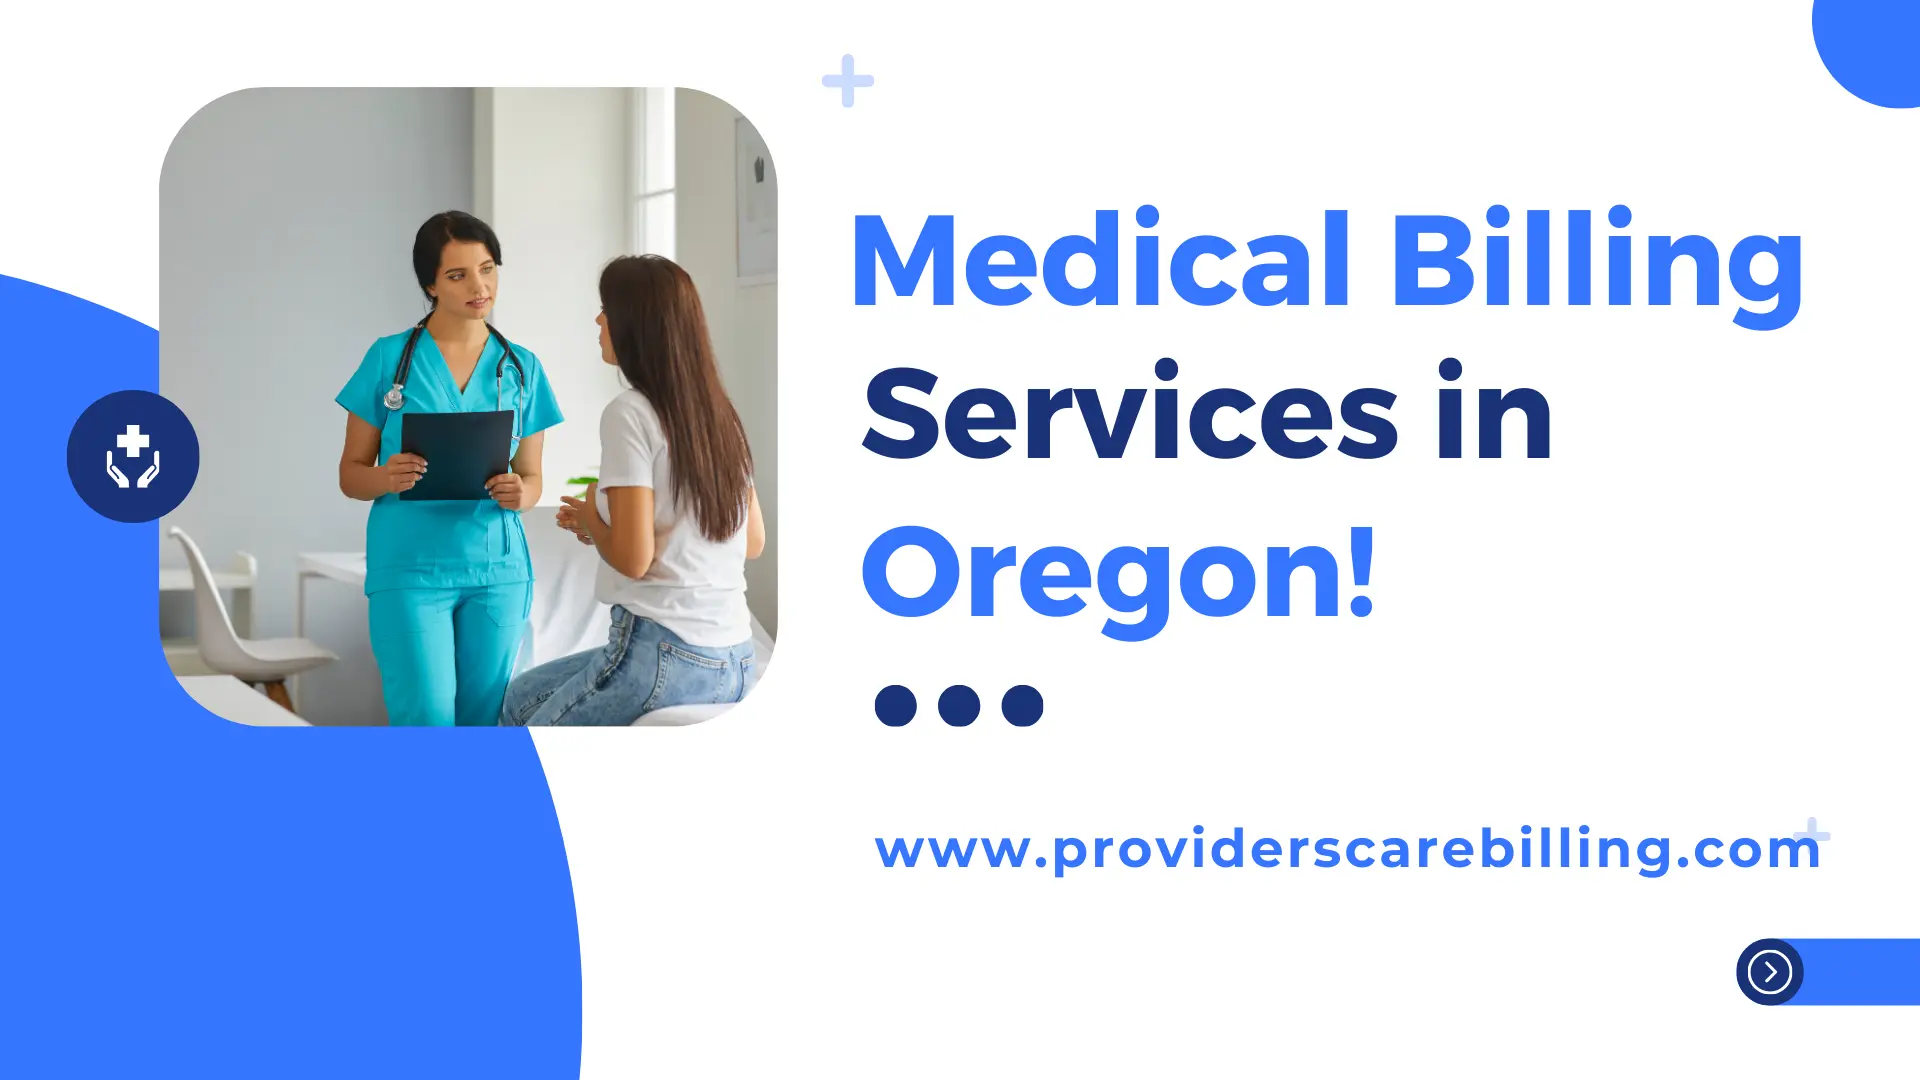 Medical Billing Services for Family Practices in Oregon!